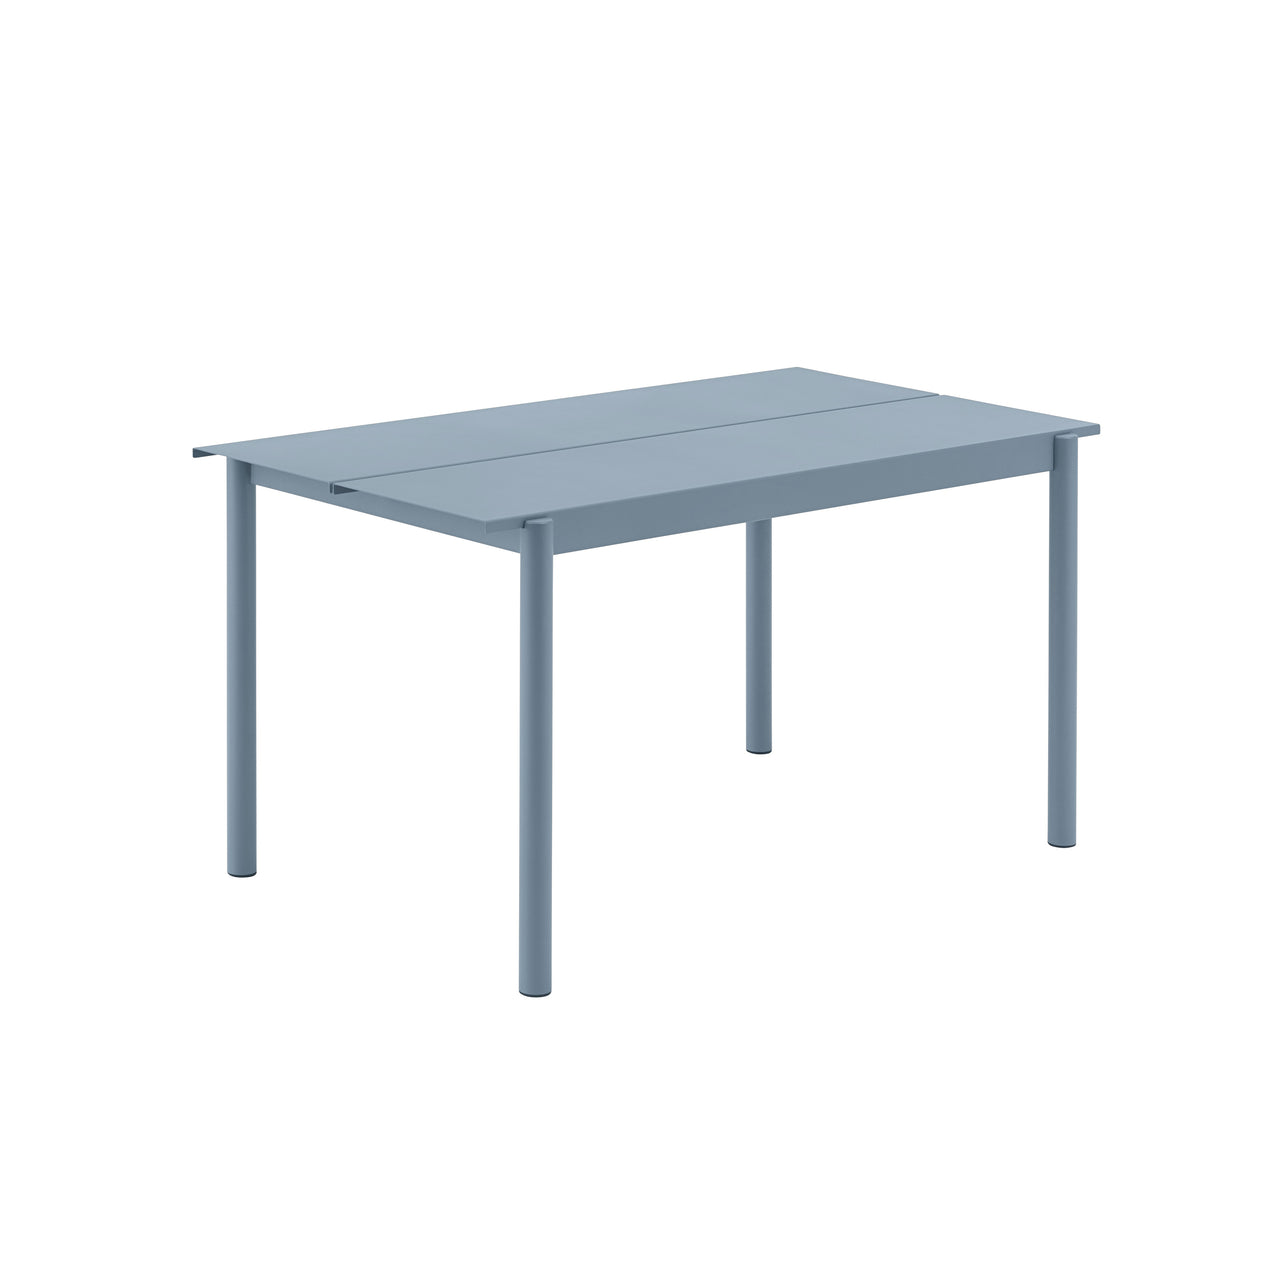 Linear Steel Table: Small - 55.1